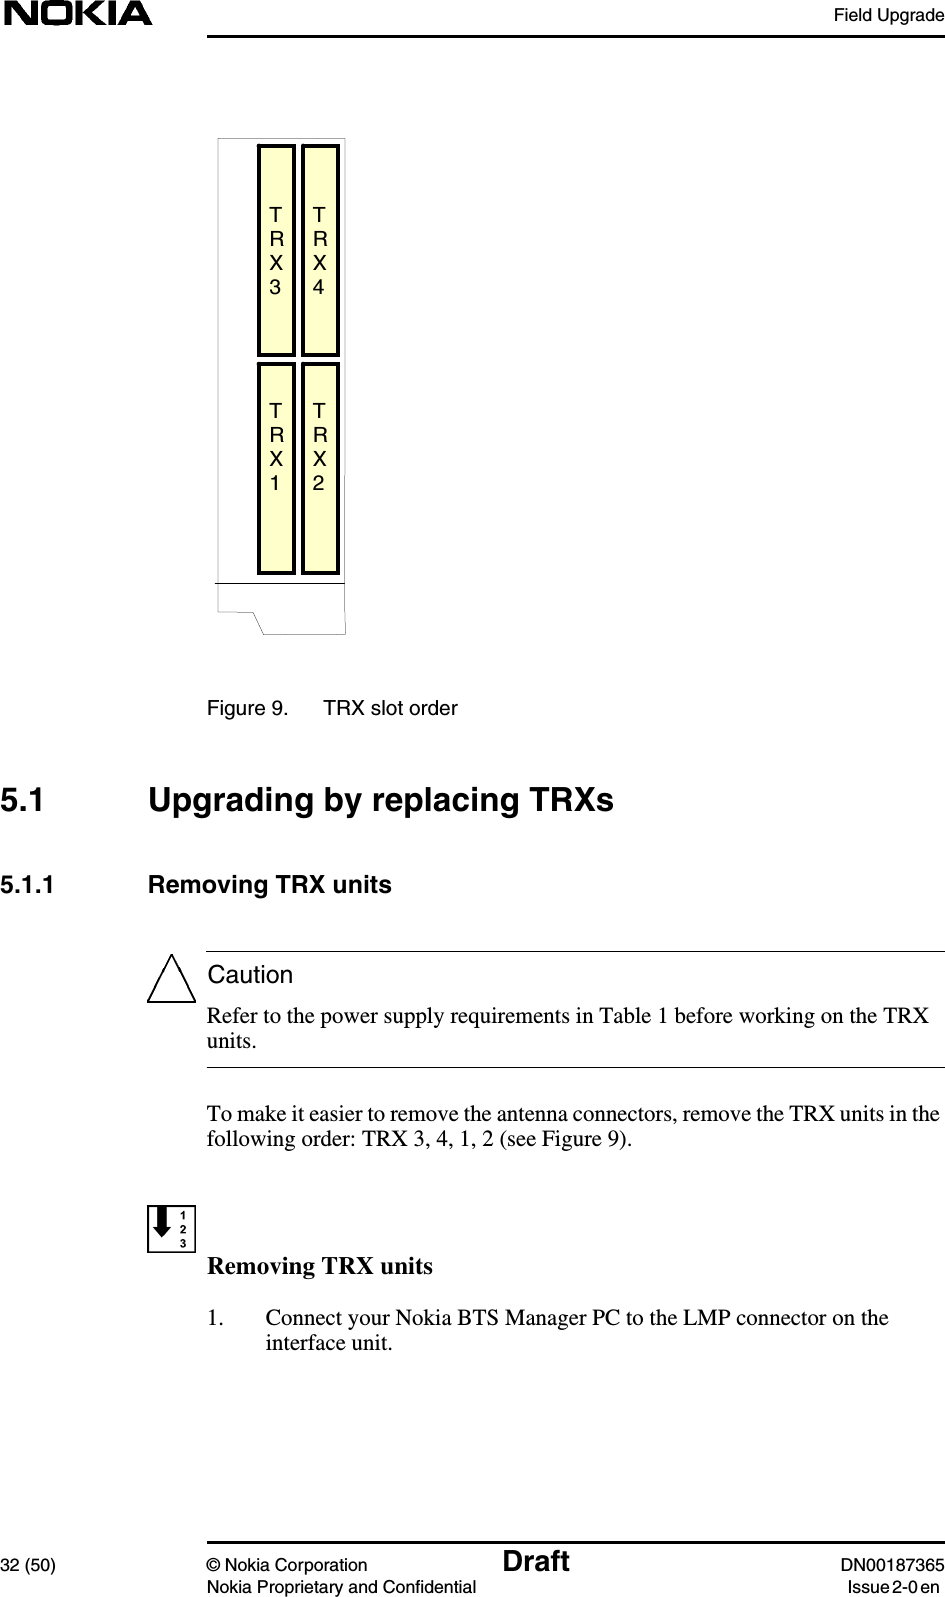 Field Upgrade32 (50) © Nokia Corporation Draft DN00187365Nokia Proprietary and Confidential Issue 2-0 enCautionFigure 9. TRX slot order5.1 Upgrading by replacing TRXs5.1.1 Removing TRX unitsRefer to the power supply requirements in Table 1 before working on the TRXunits.To make it easier to remove the antenna connectors, remove the TRX units in thefollowing order: TRX 3, 4, 1, 2 (see Figure 9).Removing TRX units1. Connect your Nokia BTS Manager PC to the LMP connector on theinterface unit.TRX3TRX4TRX1TRX2